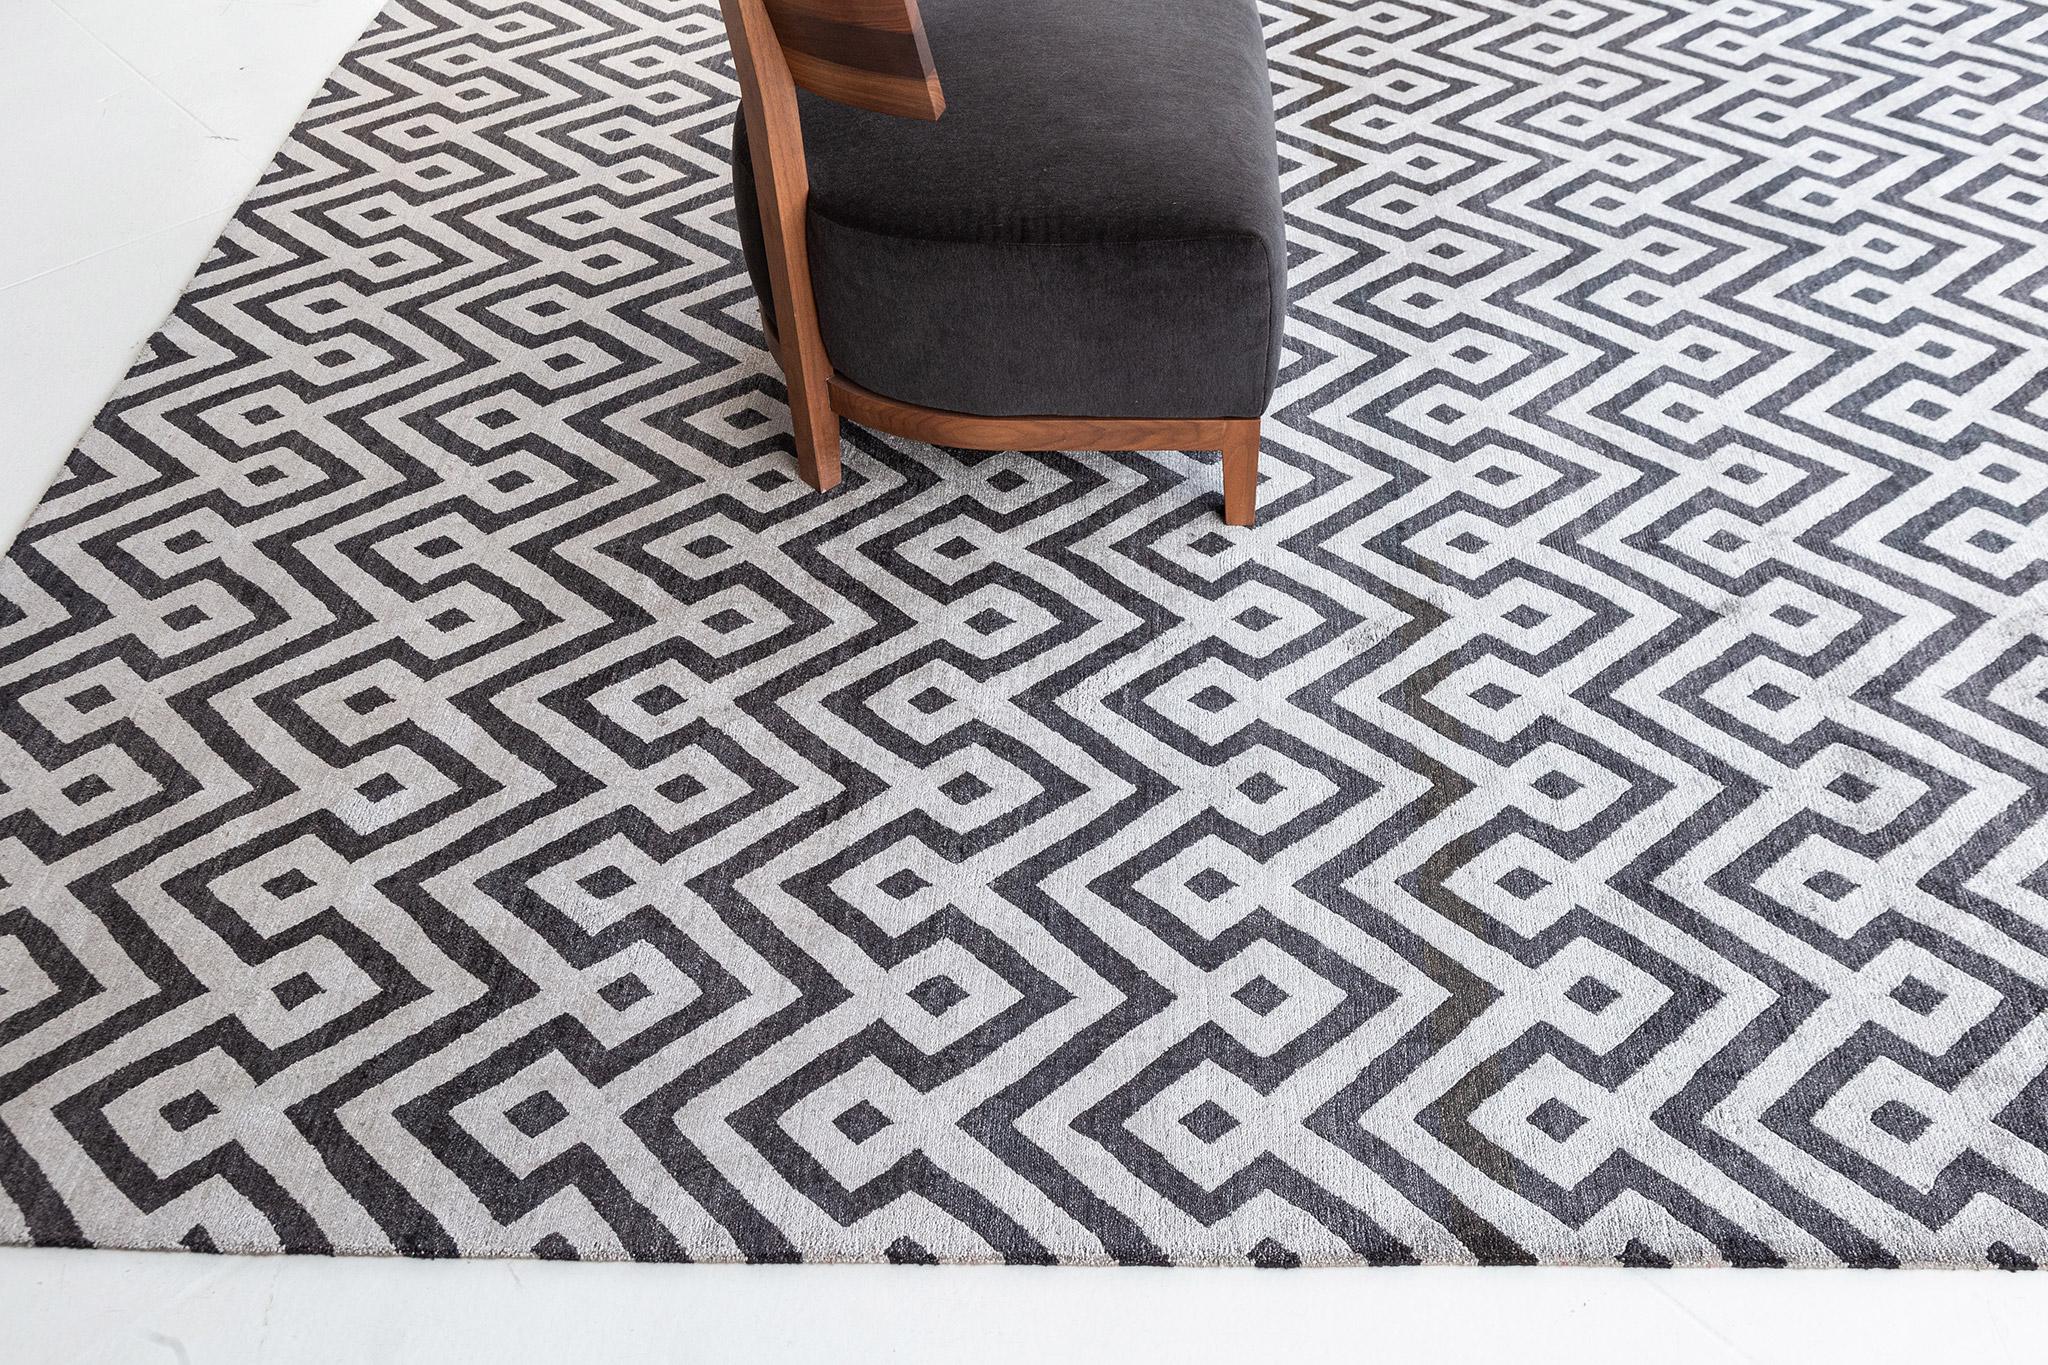 Devi' is a modern design weaving traditional geometric motifs in a modern day lattice pattern. Fascinating black and gray pattern run over along the magnificent composition of this masterpiece. This eye-catching rug will definitely elevate and bring